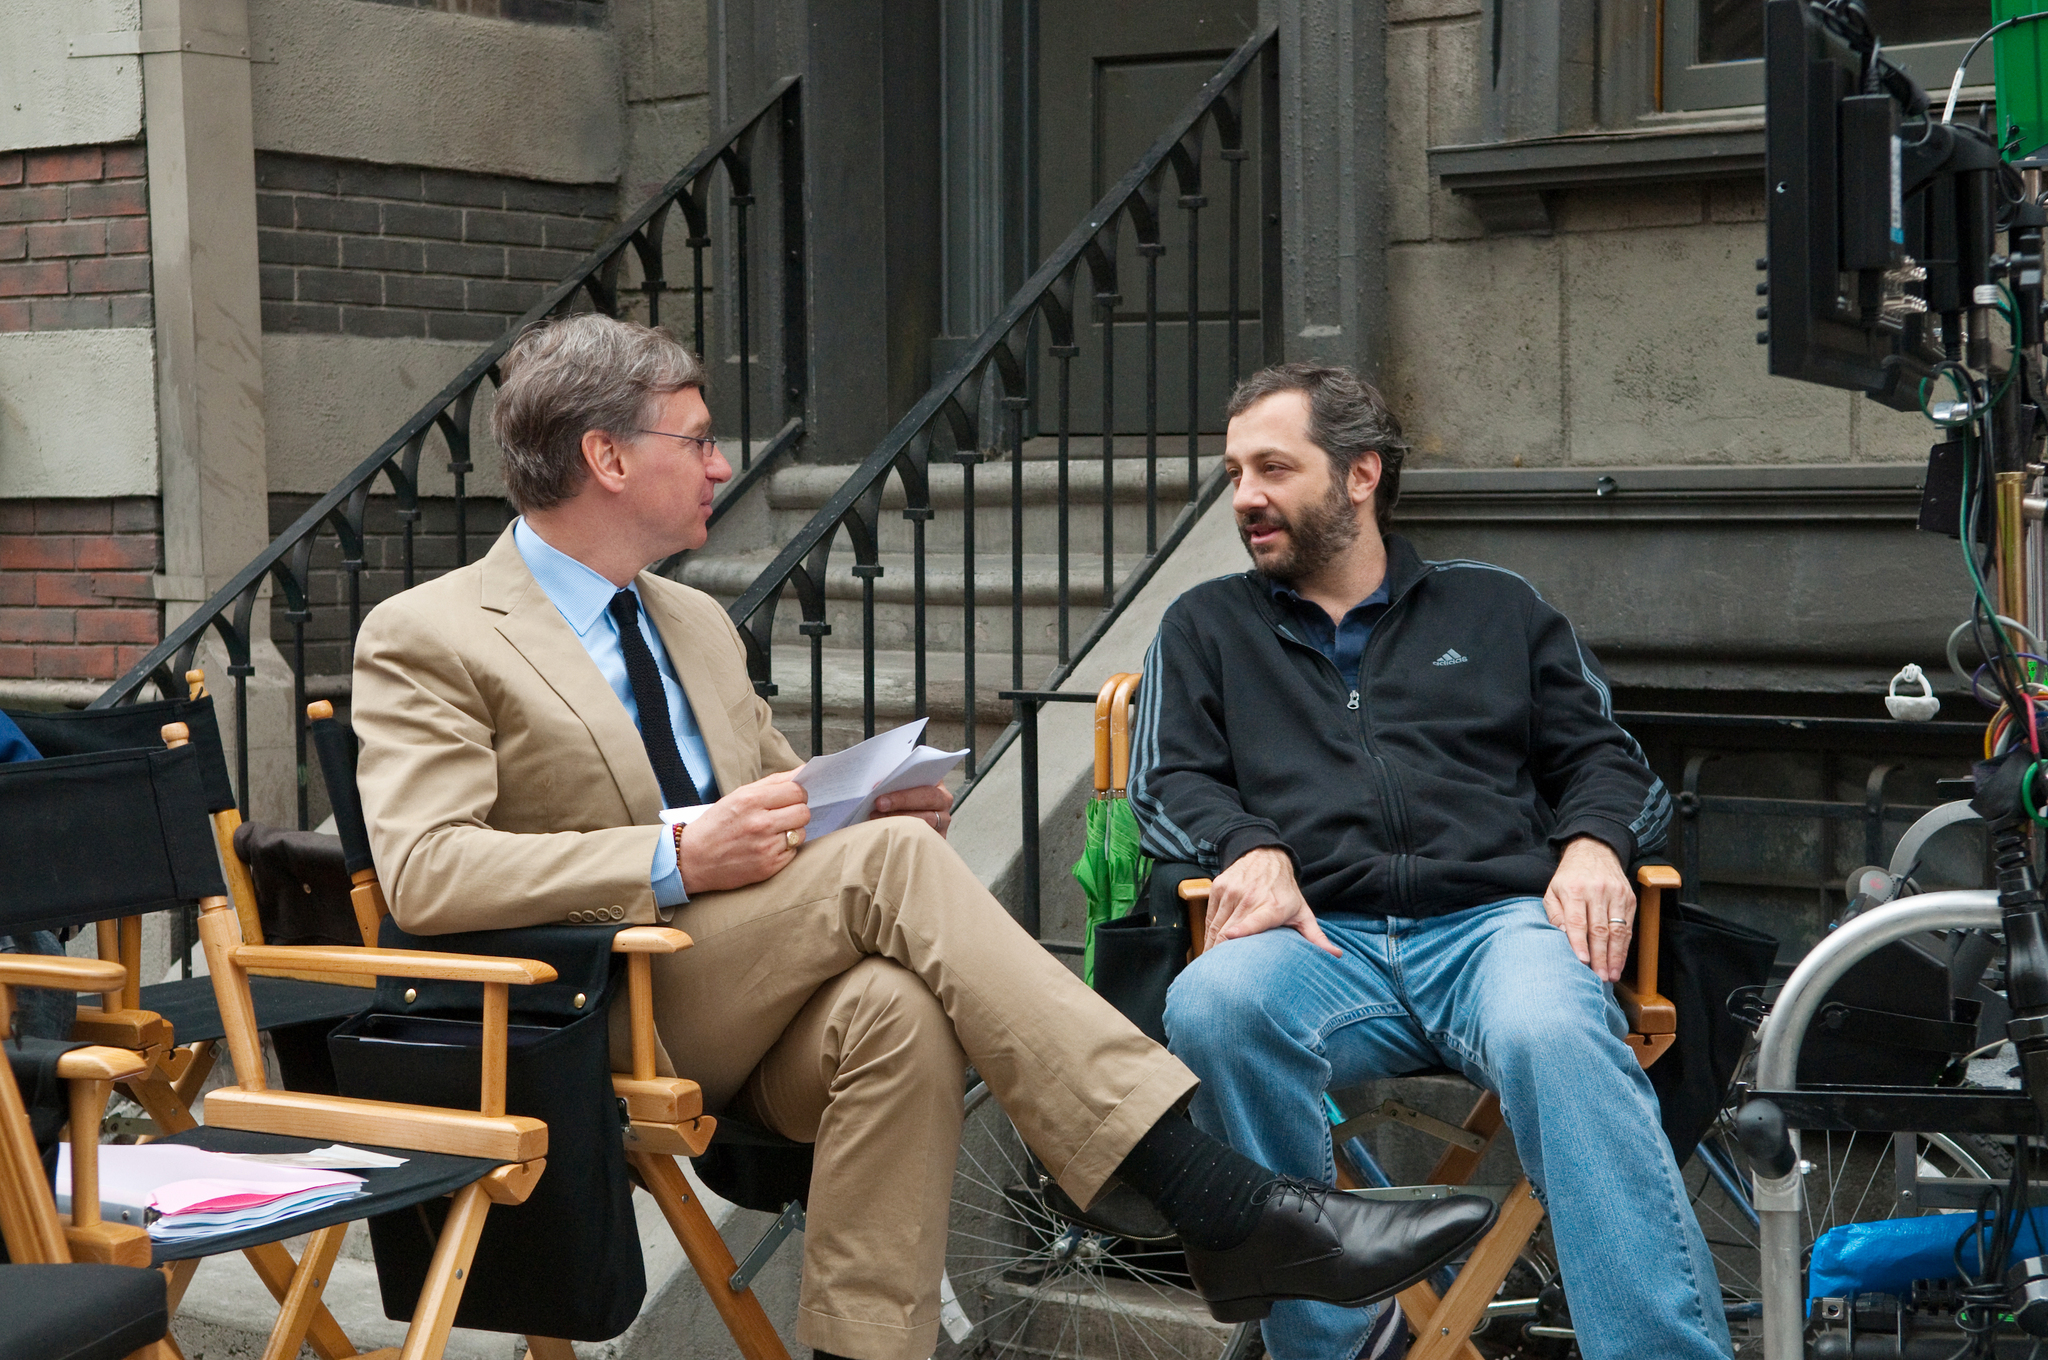 Still of Judd Apatow and Paul Feig in Sunokusios pamerges (2011)